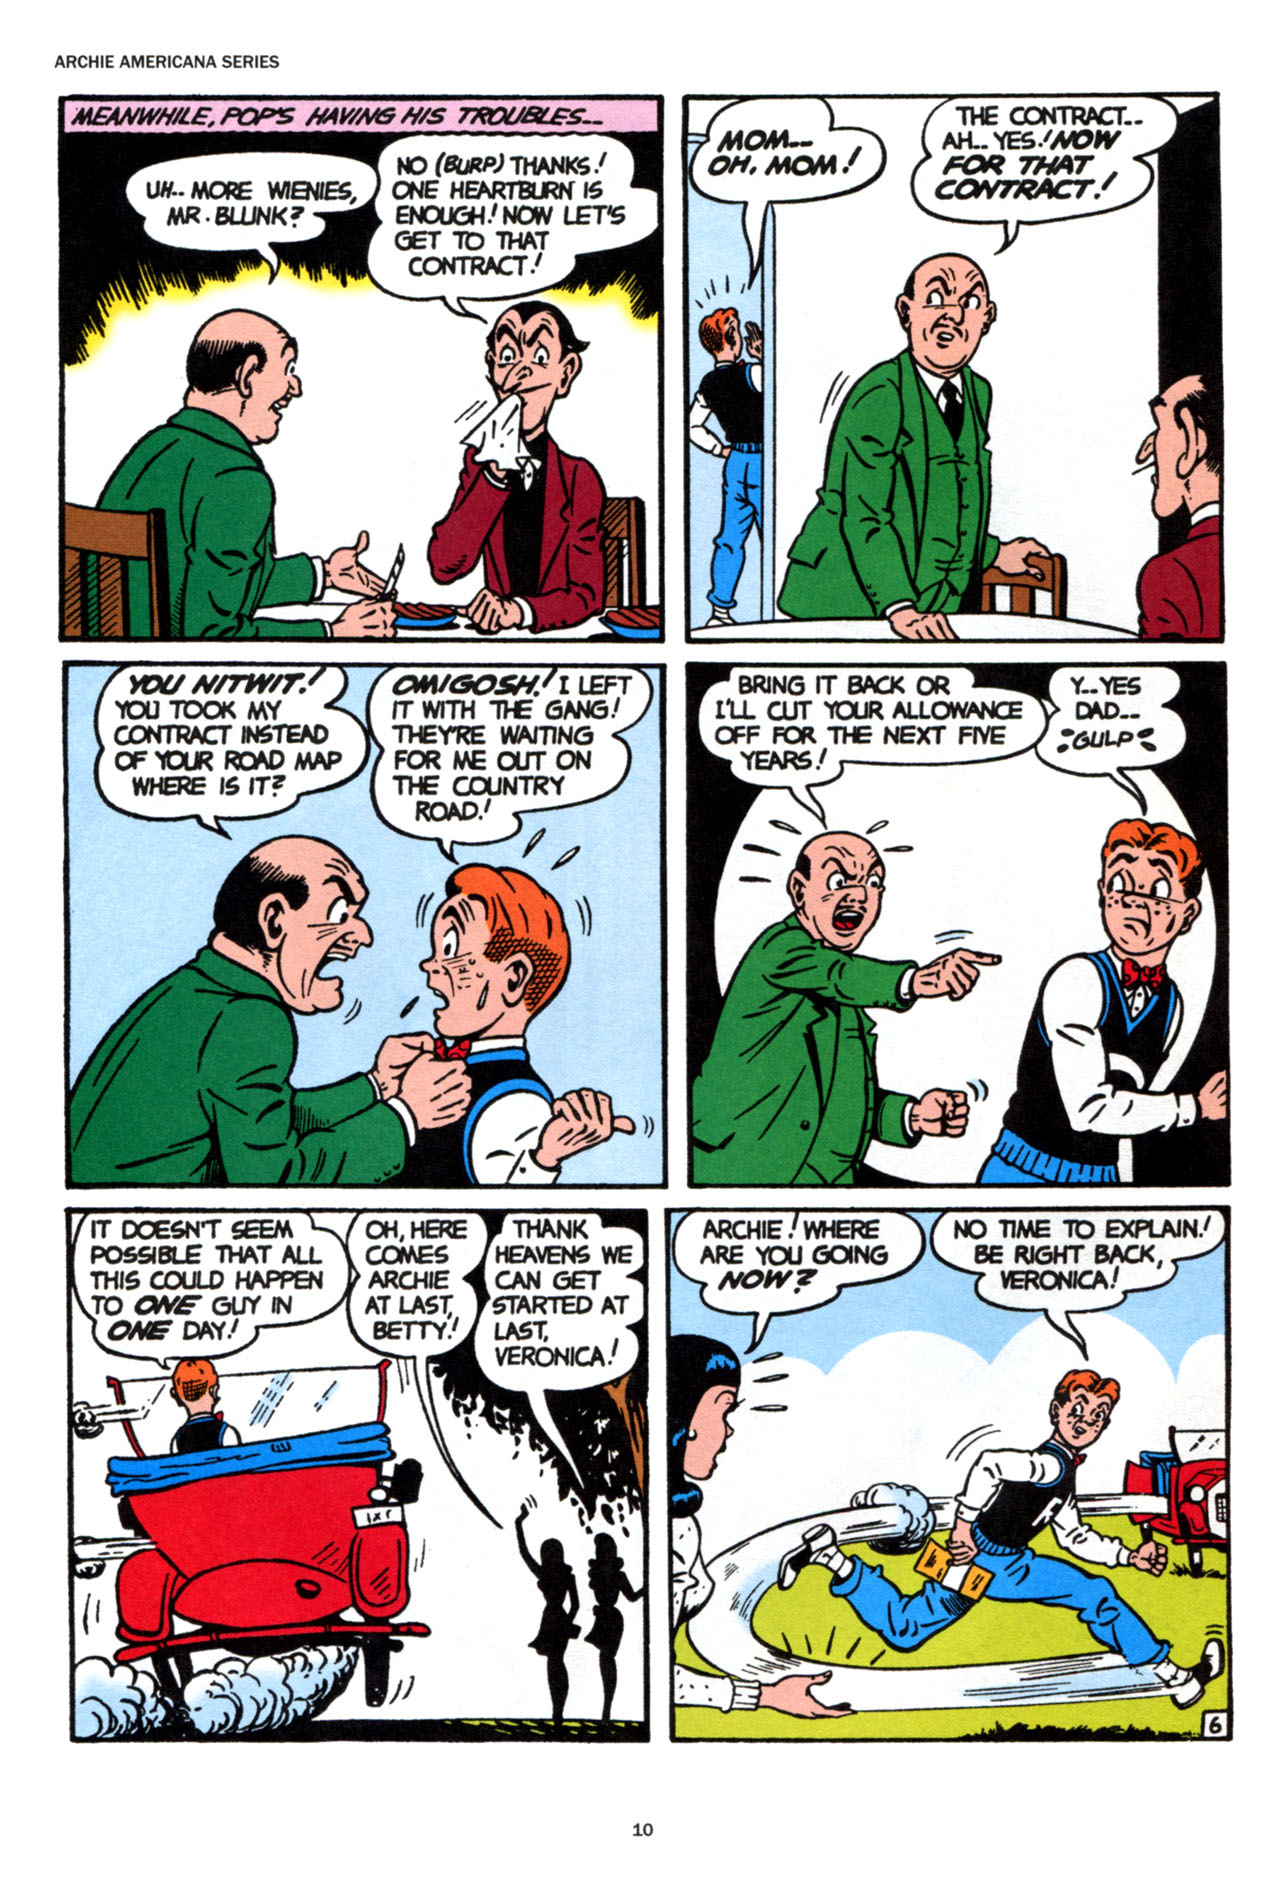 Read online Archie Americana Series comic -  Issue # TPB 6 - 11